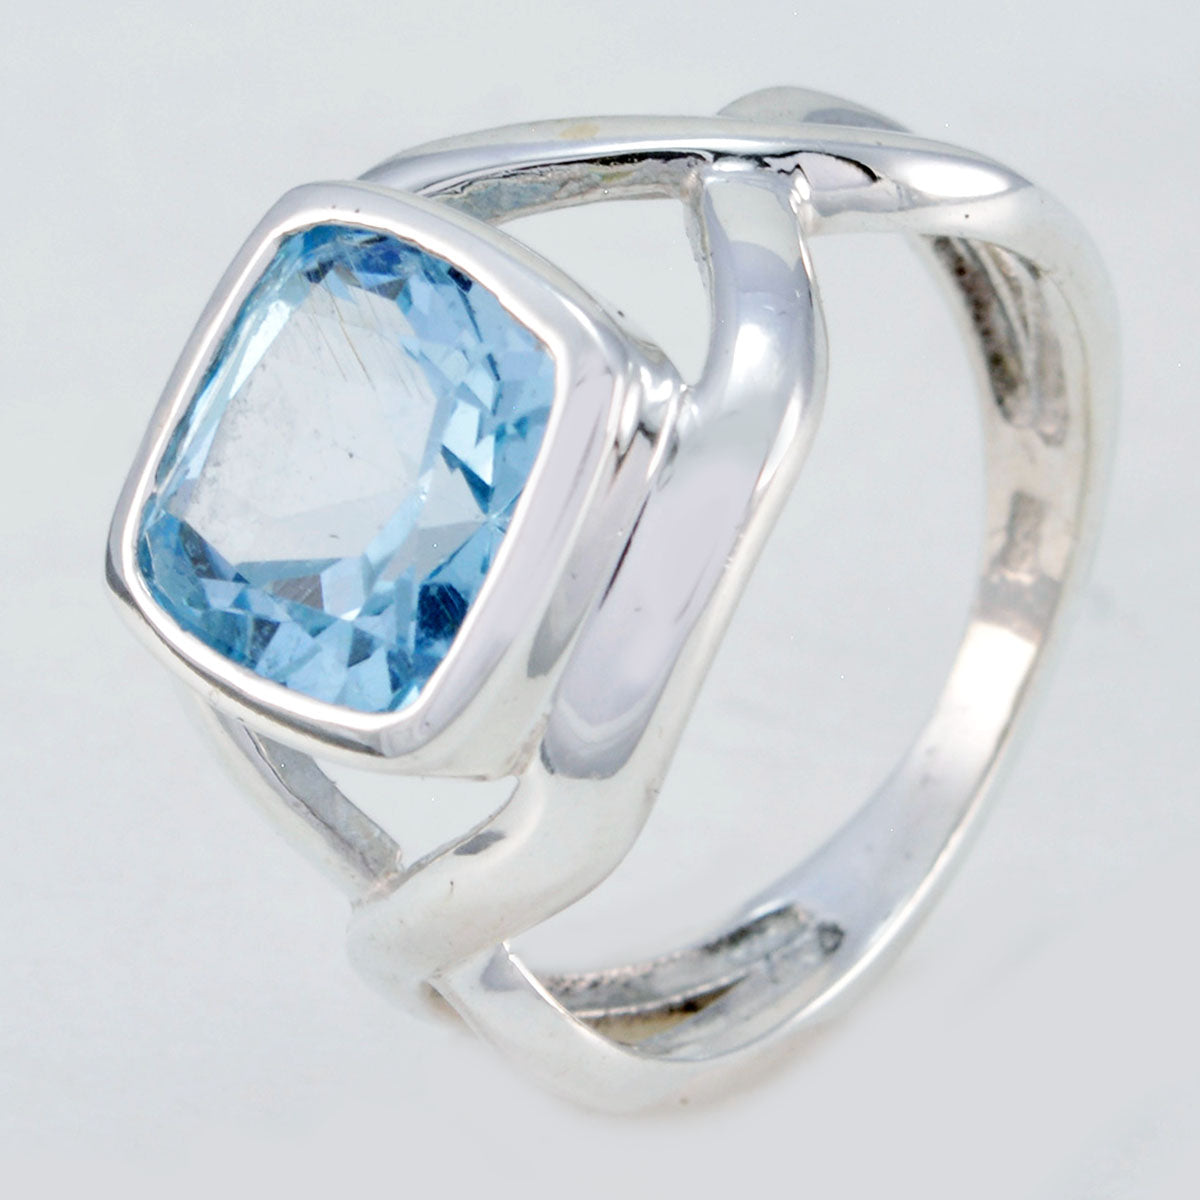 Nice Gems Blue Topaz Sterling Silver Ring Jewelry Supplies Wholesale